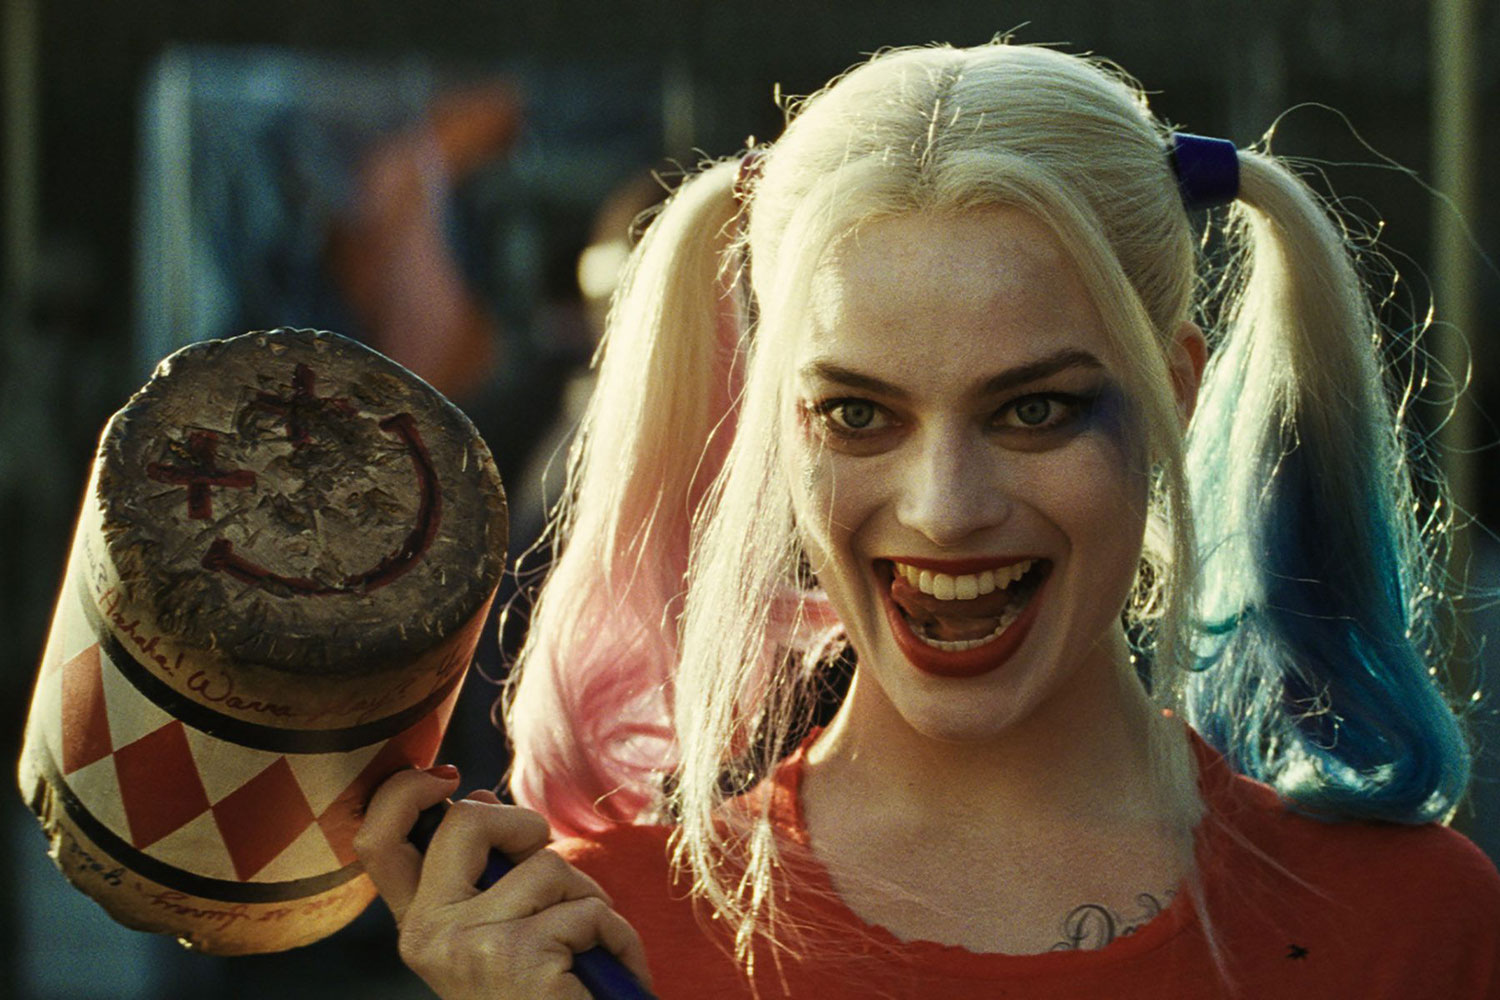 When is Suicide Squad 2 coming out? Release date, director, cast